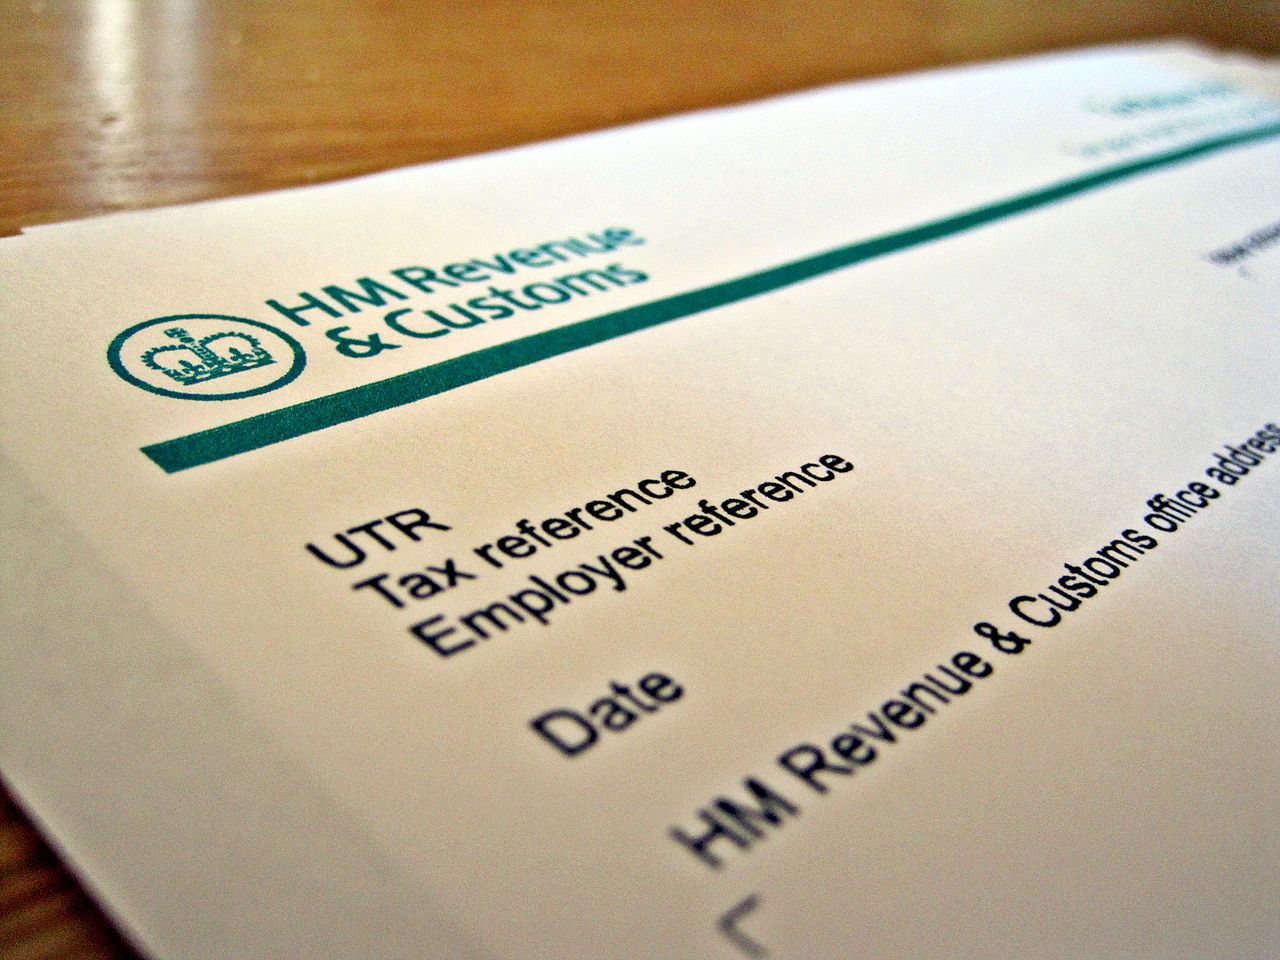 Why file 2016-17 self assessment tax return early? - Latest Advice from Wagner Mason